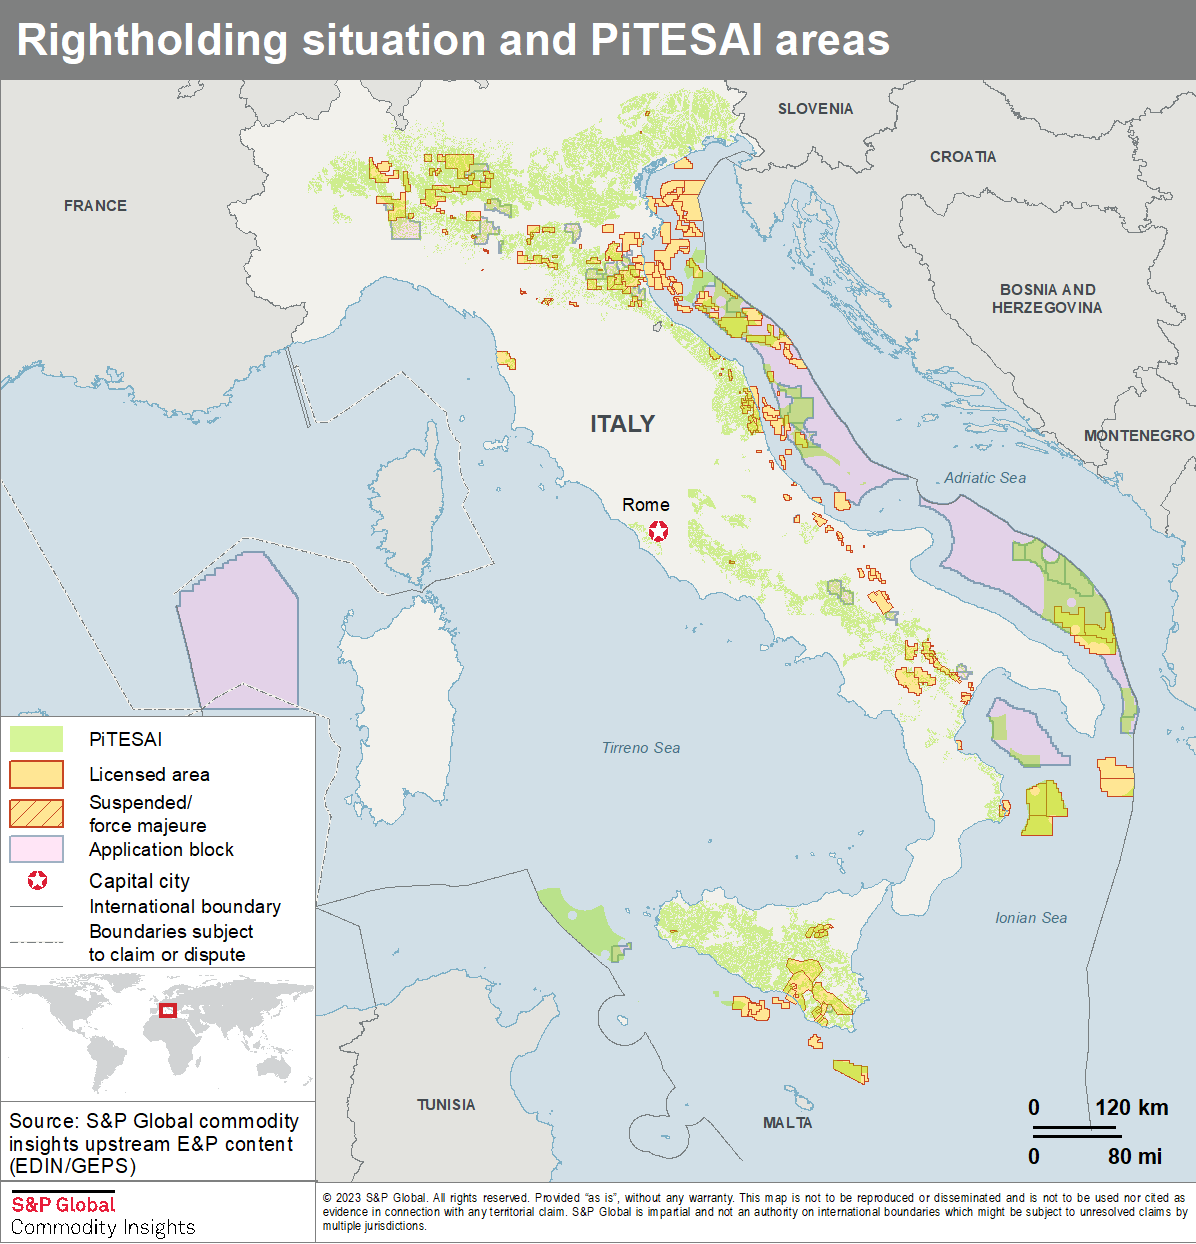 Rightholding situation and PiTESAI areas